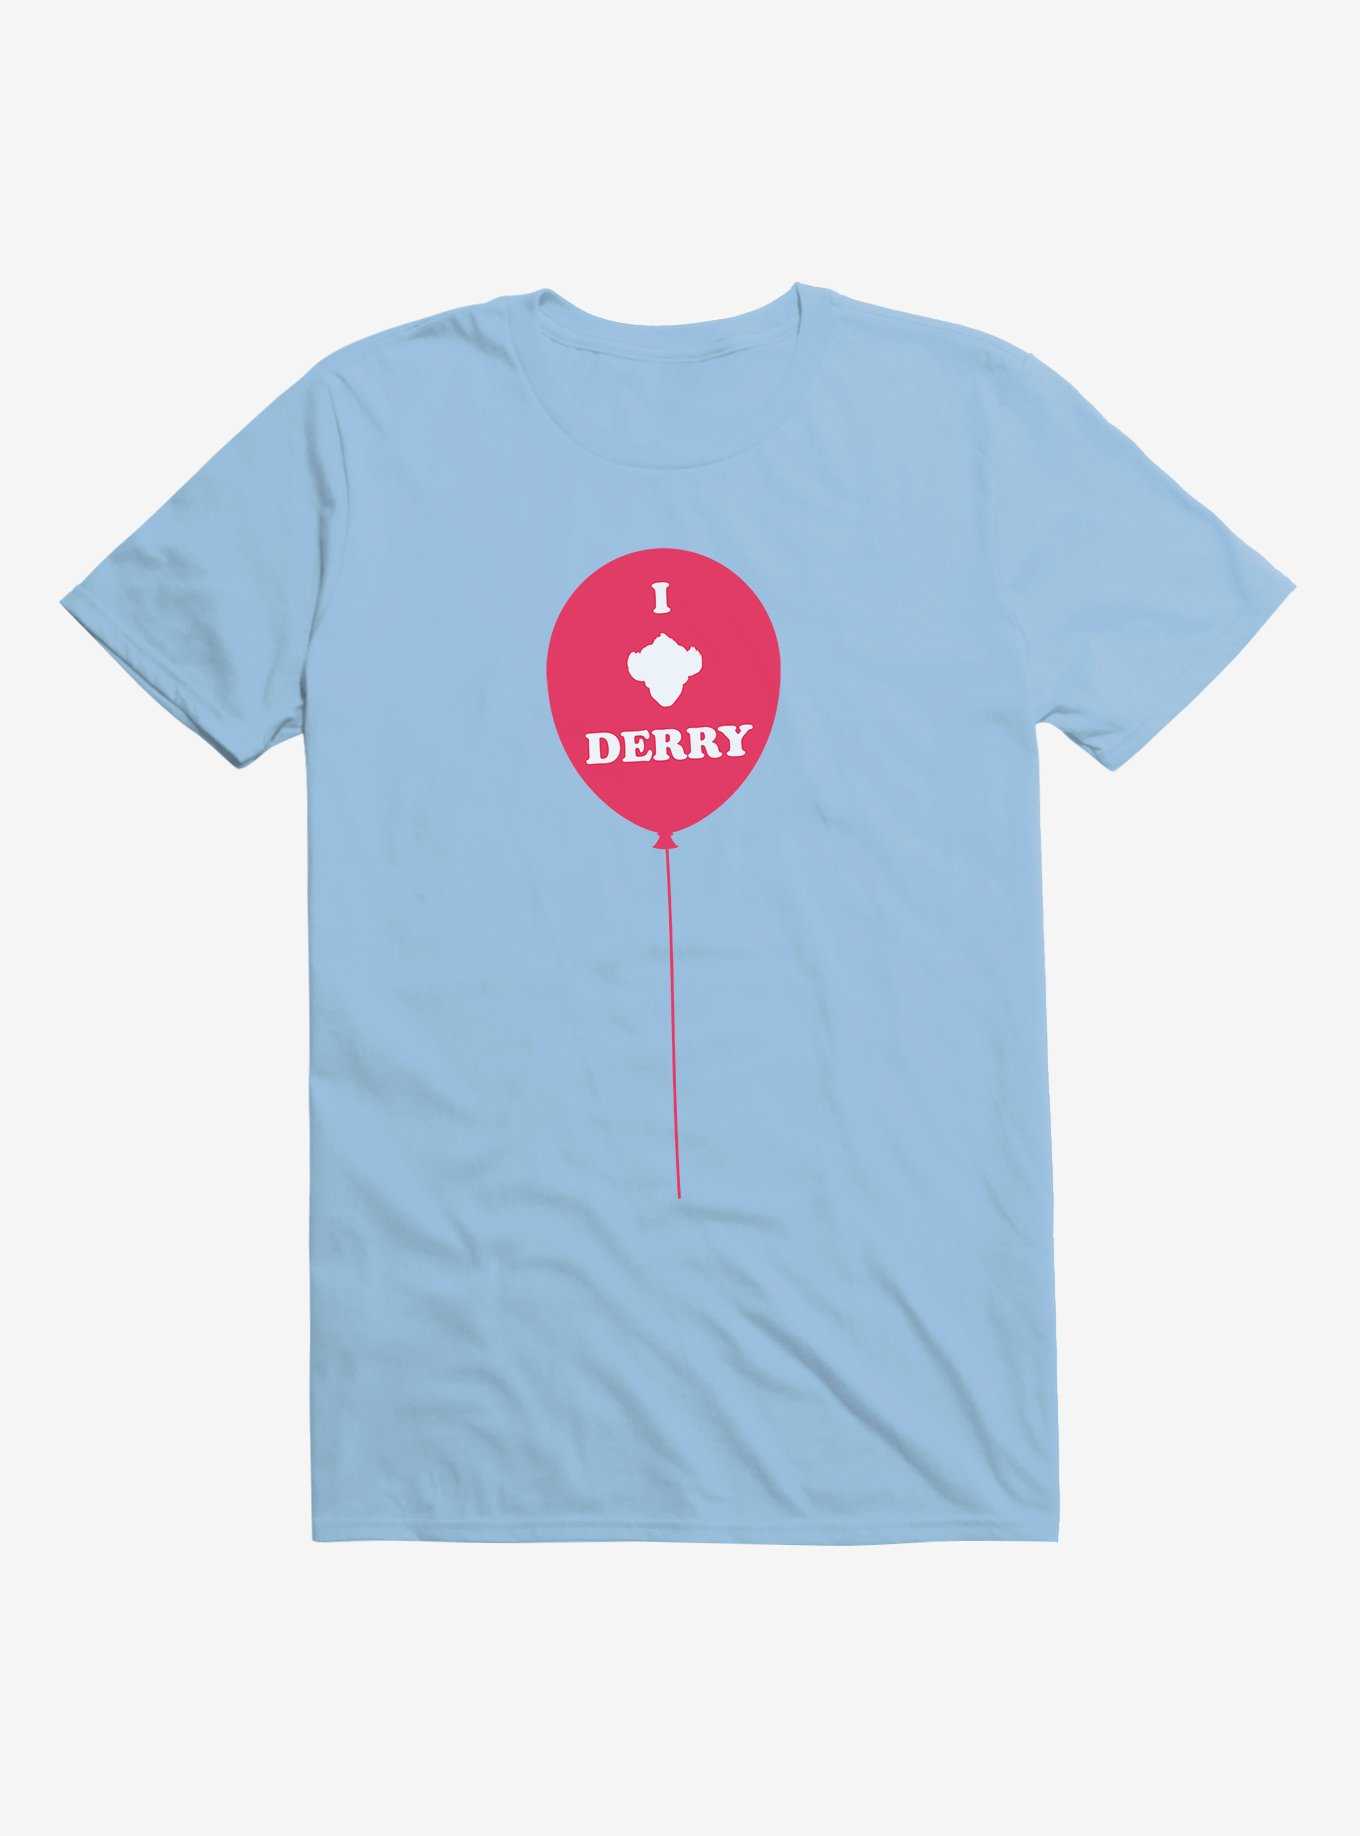 IT Chapter Two I Pennywise Derry Balloon T-Shirt, , hi-res